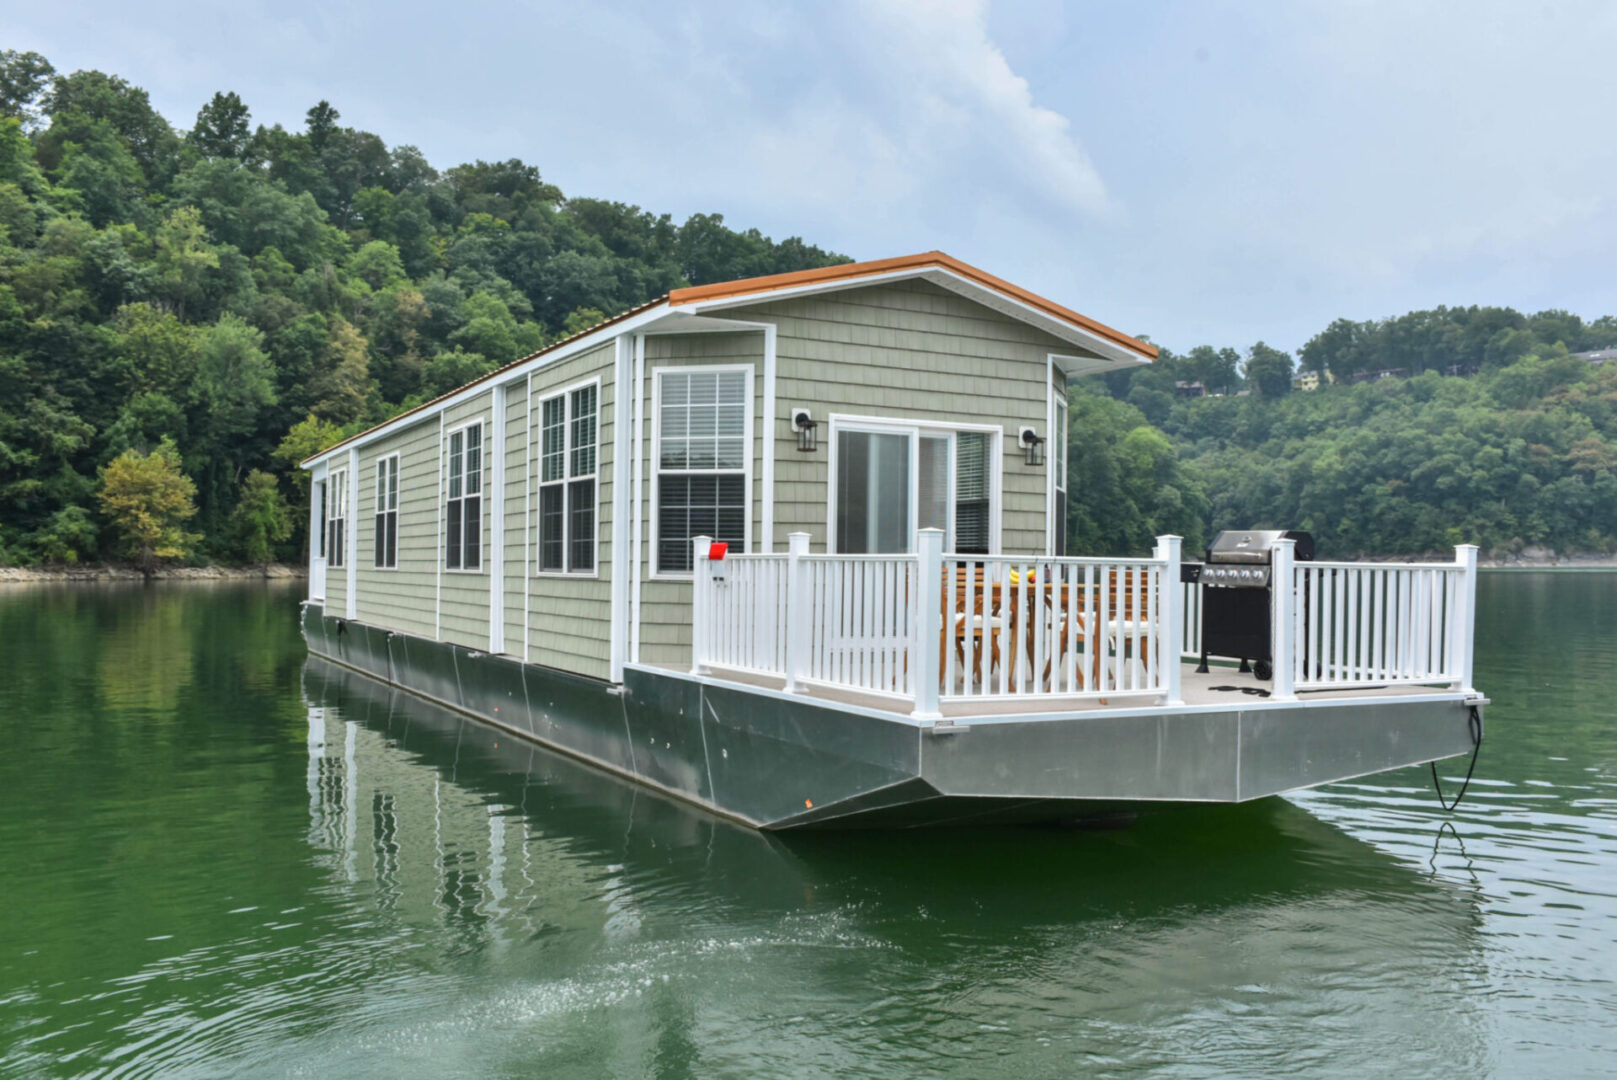 White-fenced deck of the bow area of a green houseboat